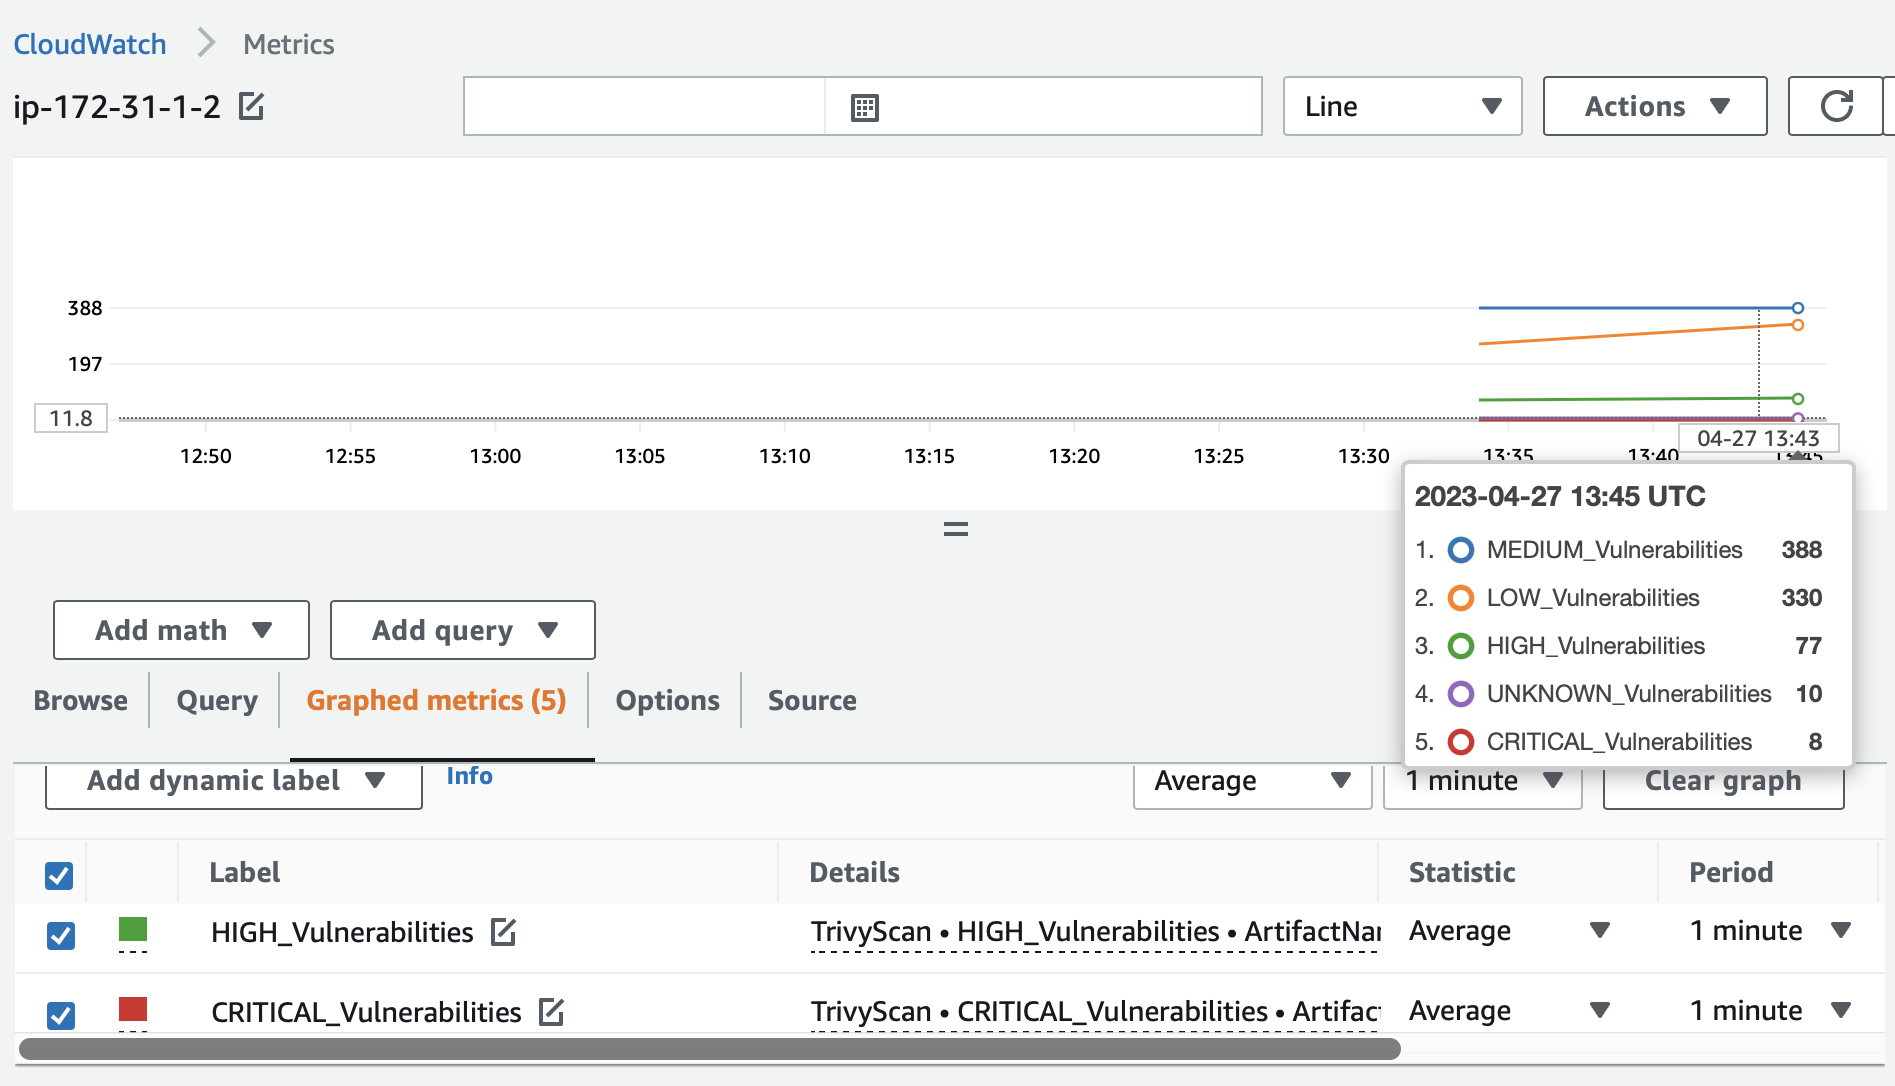 Metrics visible in CloudWatch